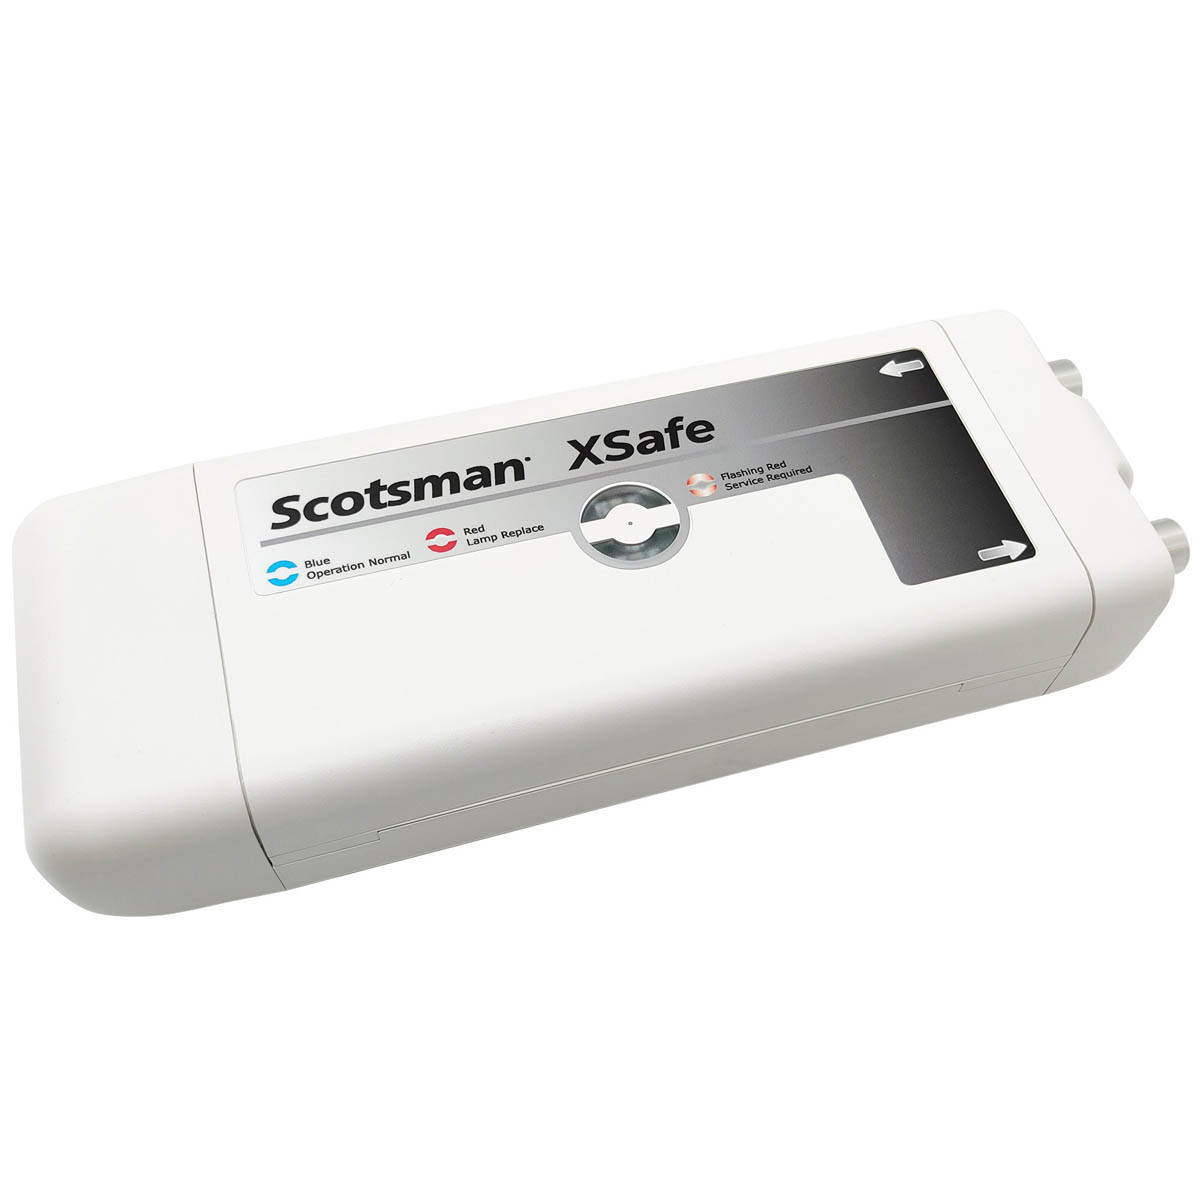 Scotsman XR-30 XSafe Virus and Bacteria Sanitation System, Chef's Deal